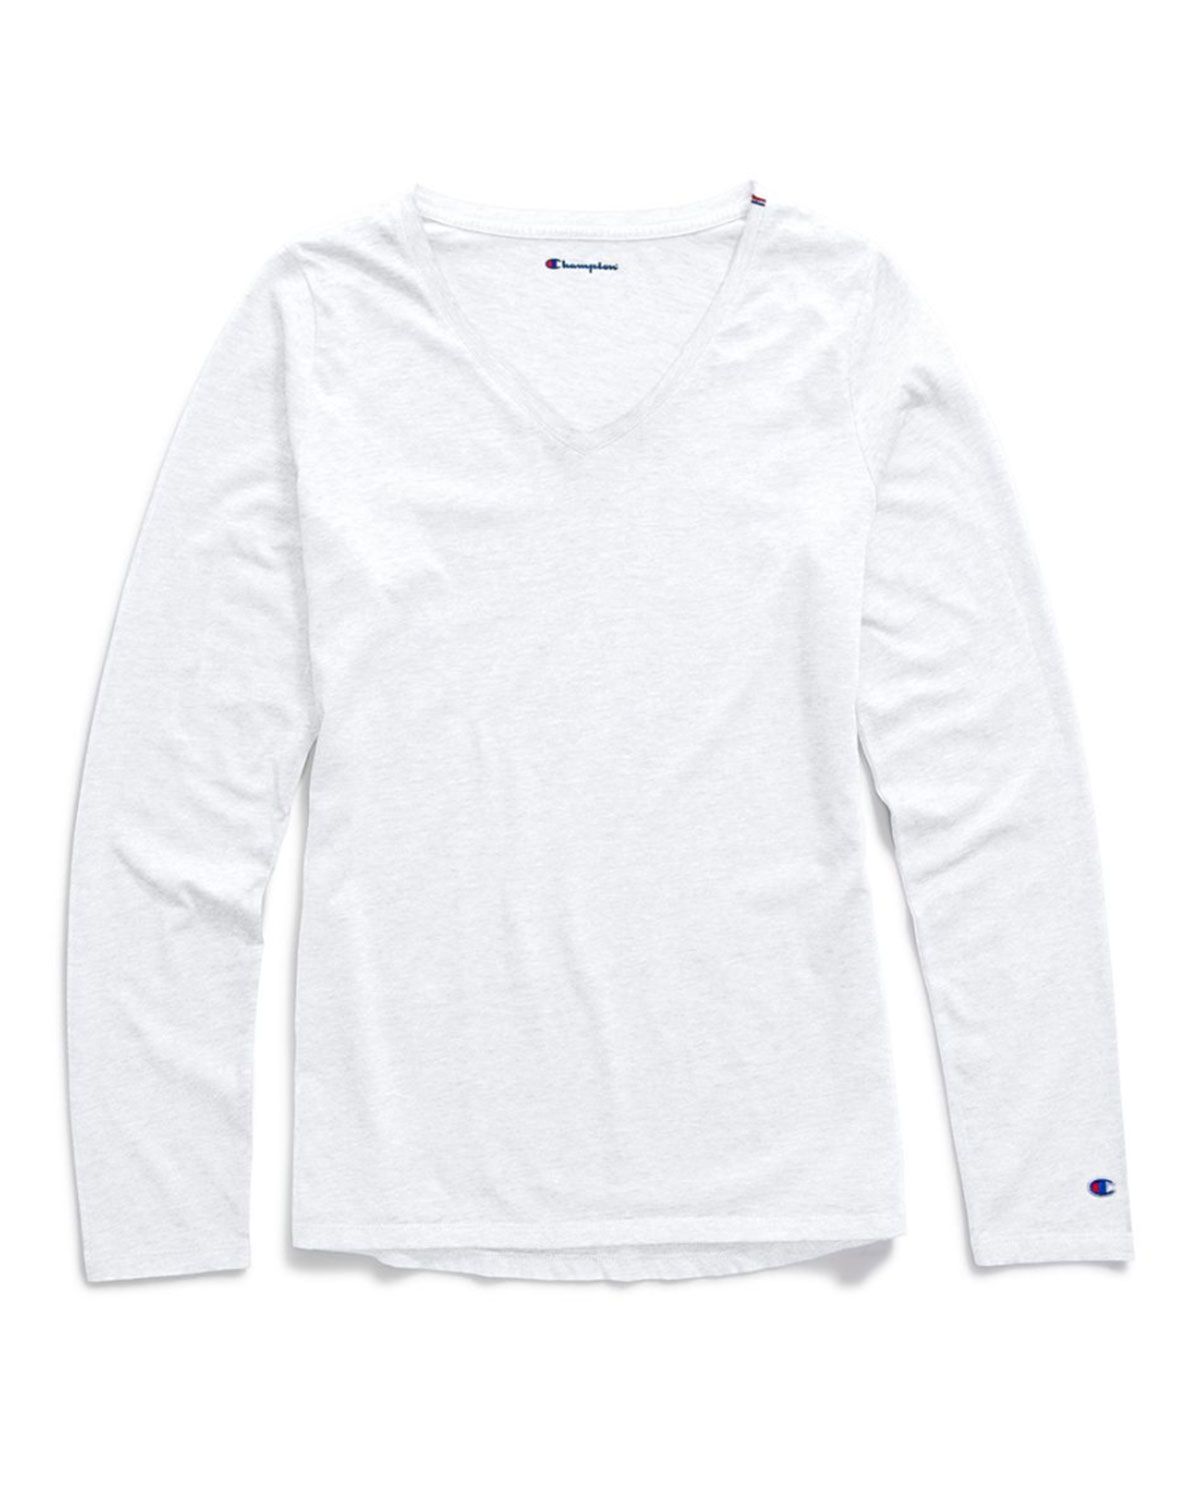 champion semi fitted long sleeve shirt